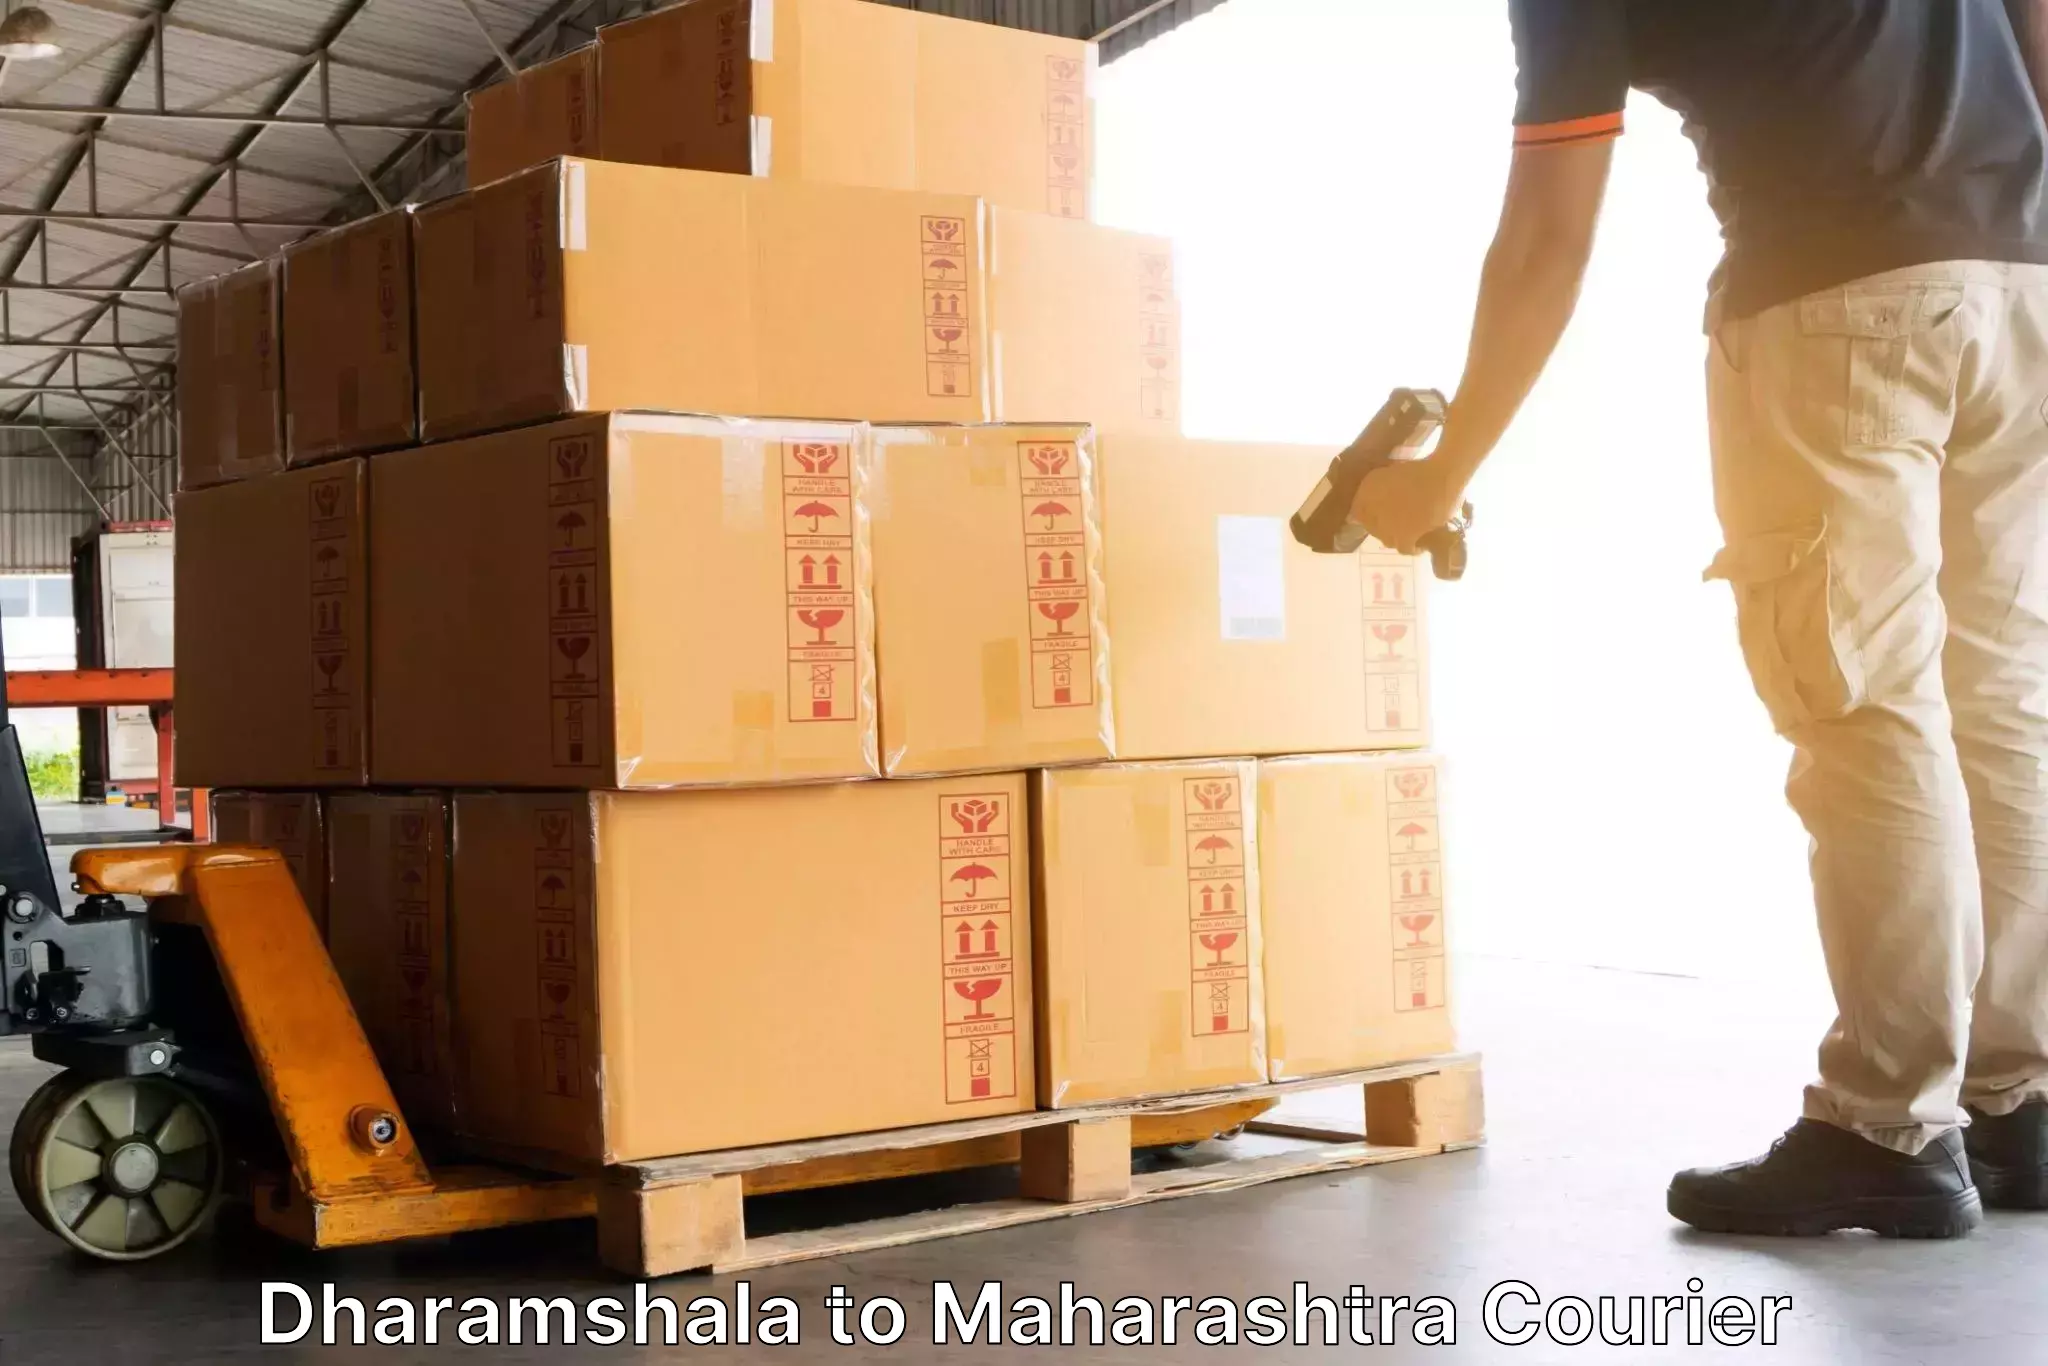 Courier service booking Dharamshala to Amdapur